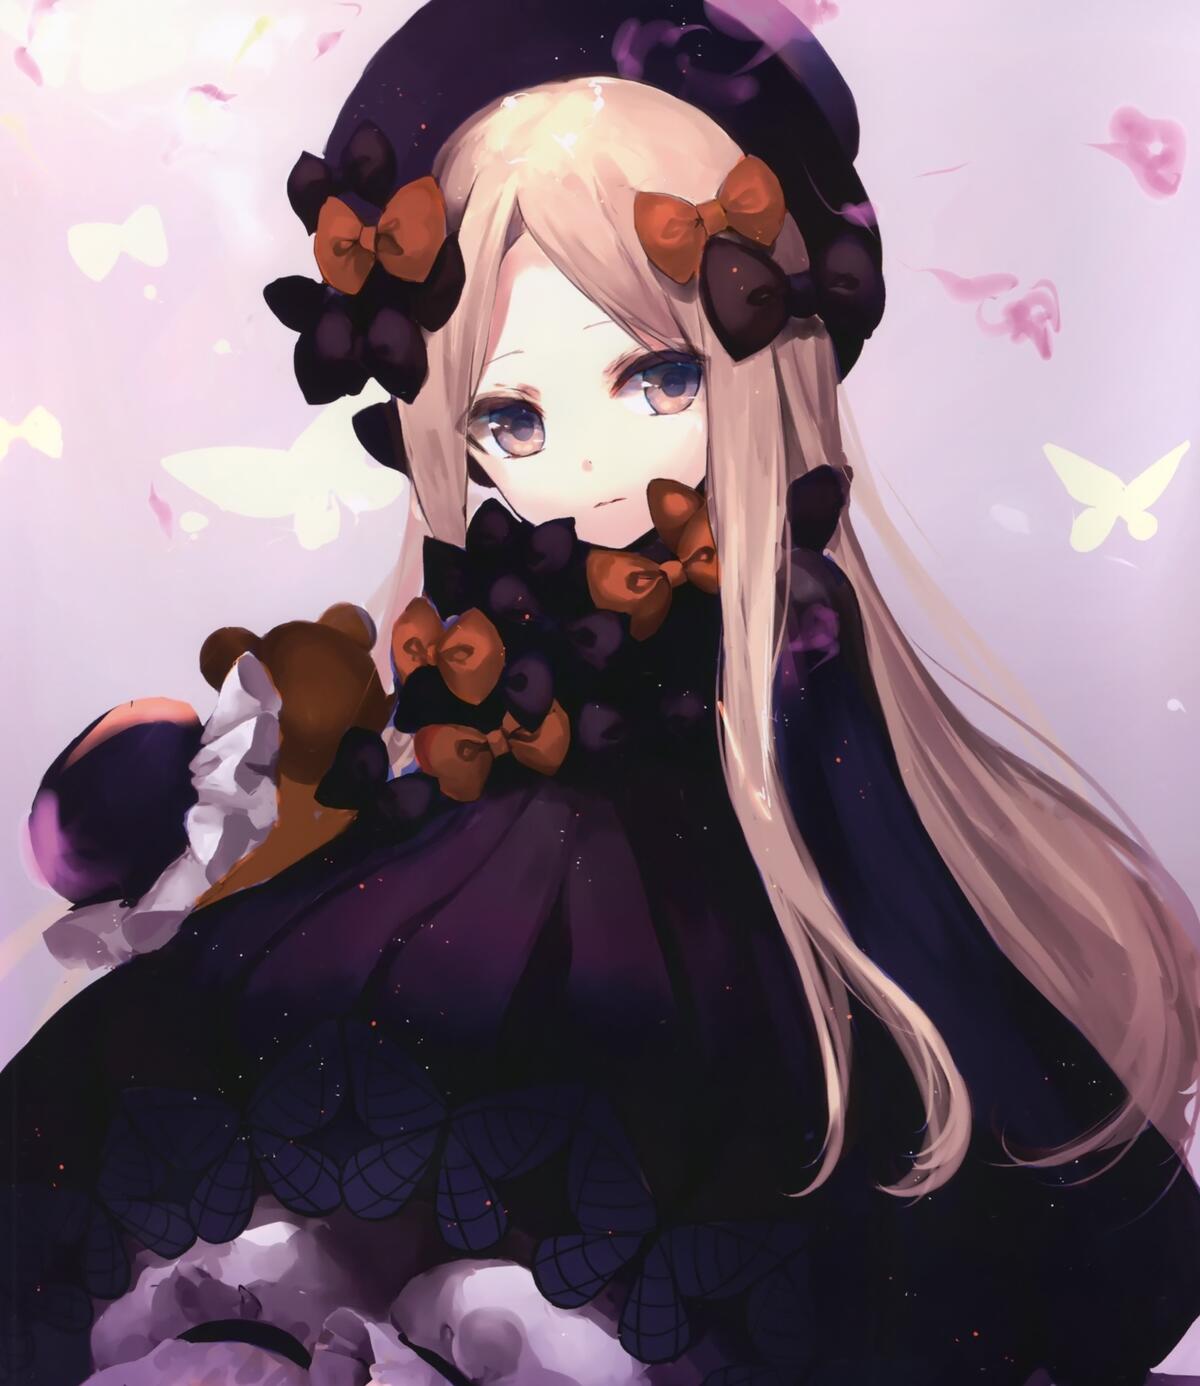 Anime girl Abigail Williams with bows in her hair.